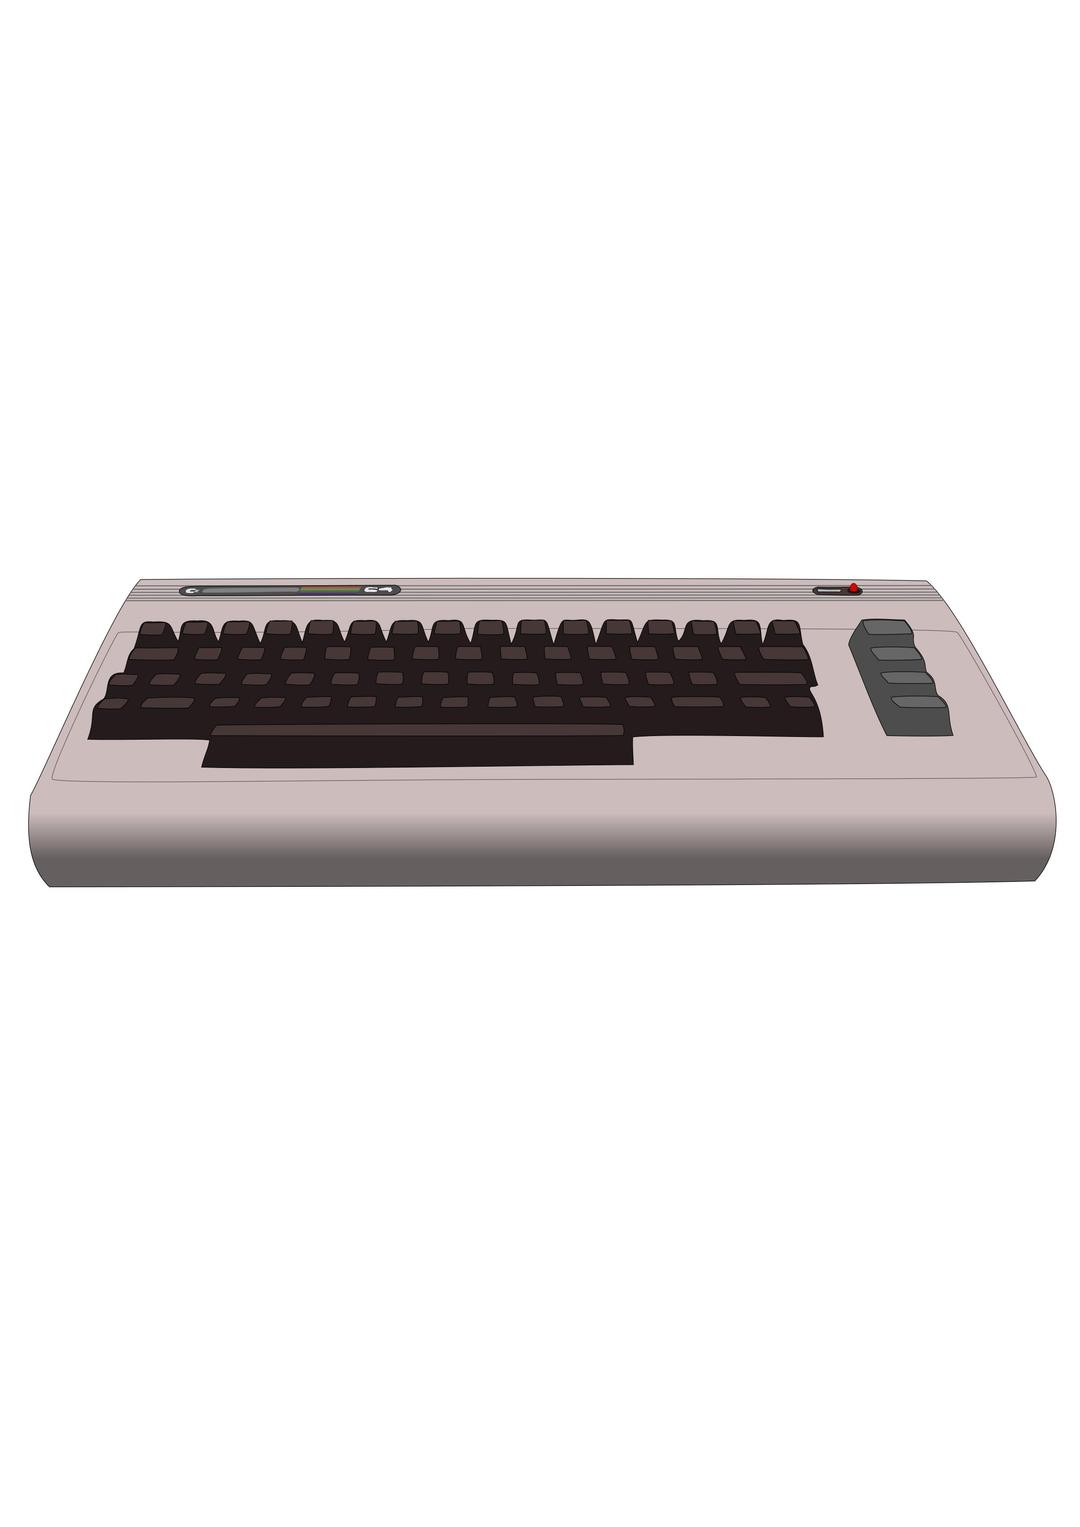 Commodore 64 Computer png transparent